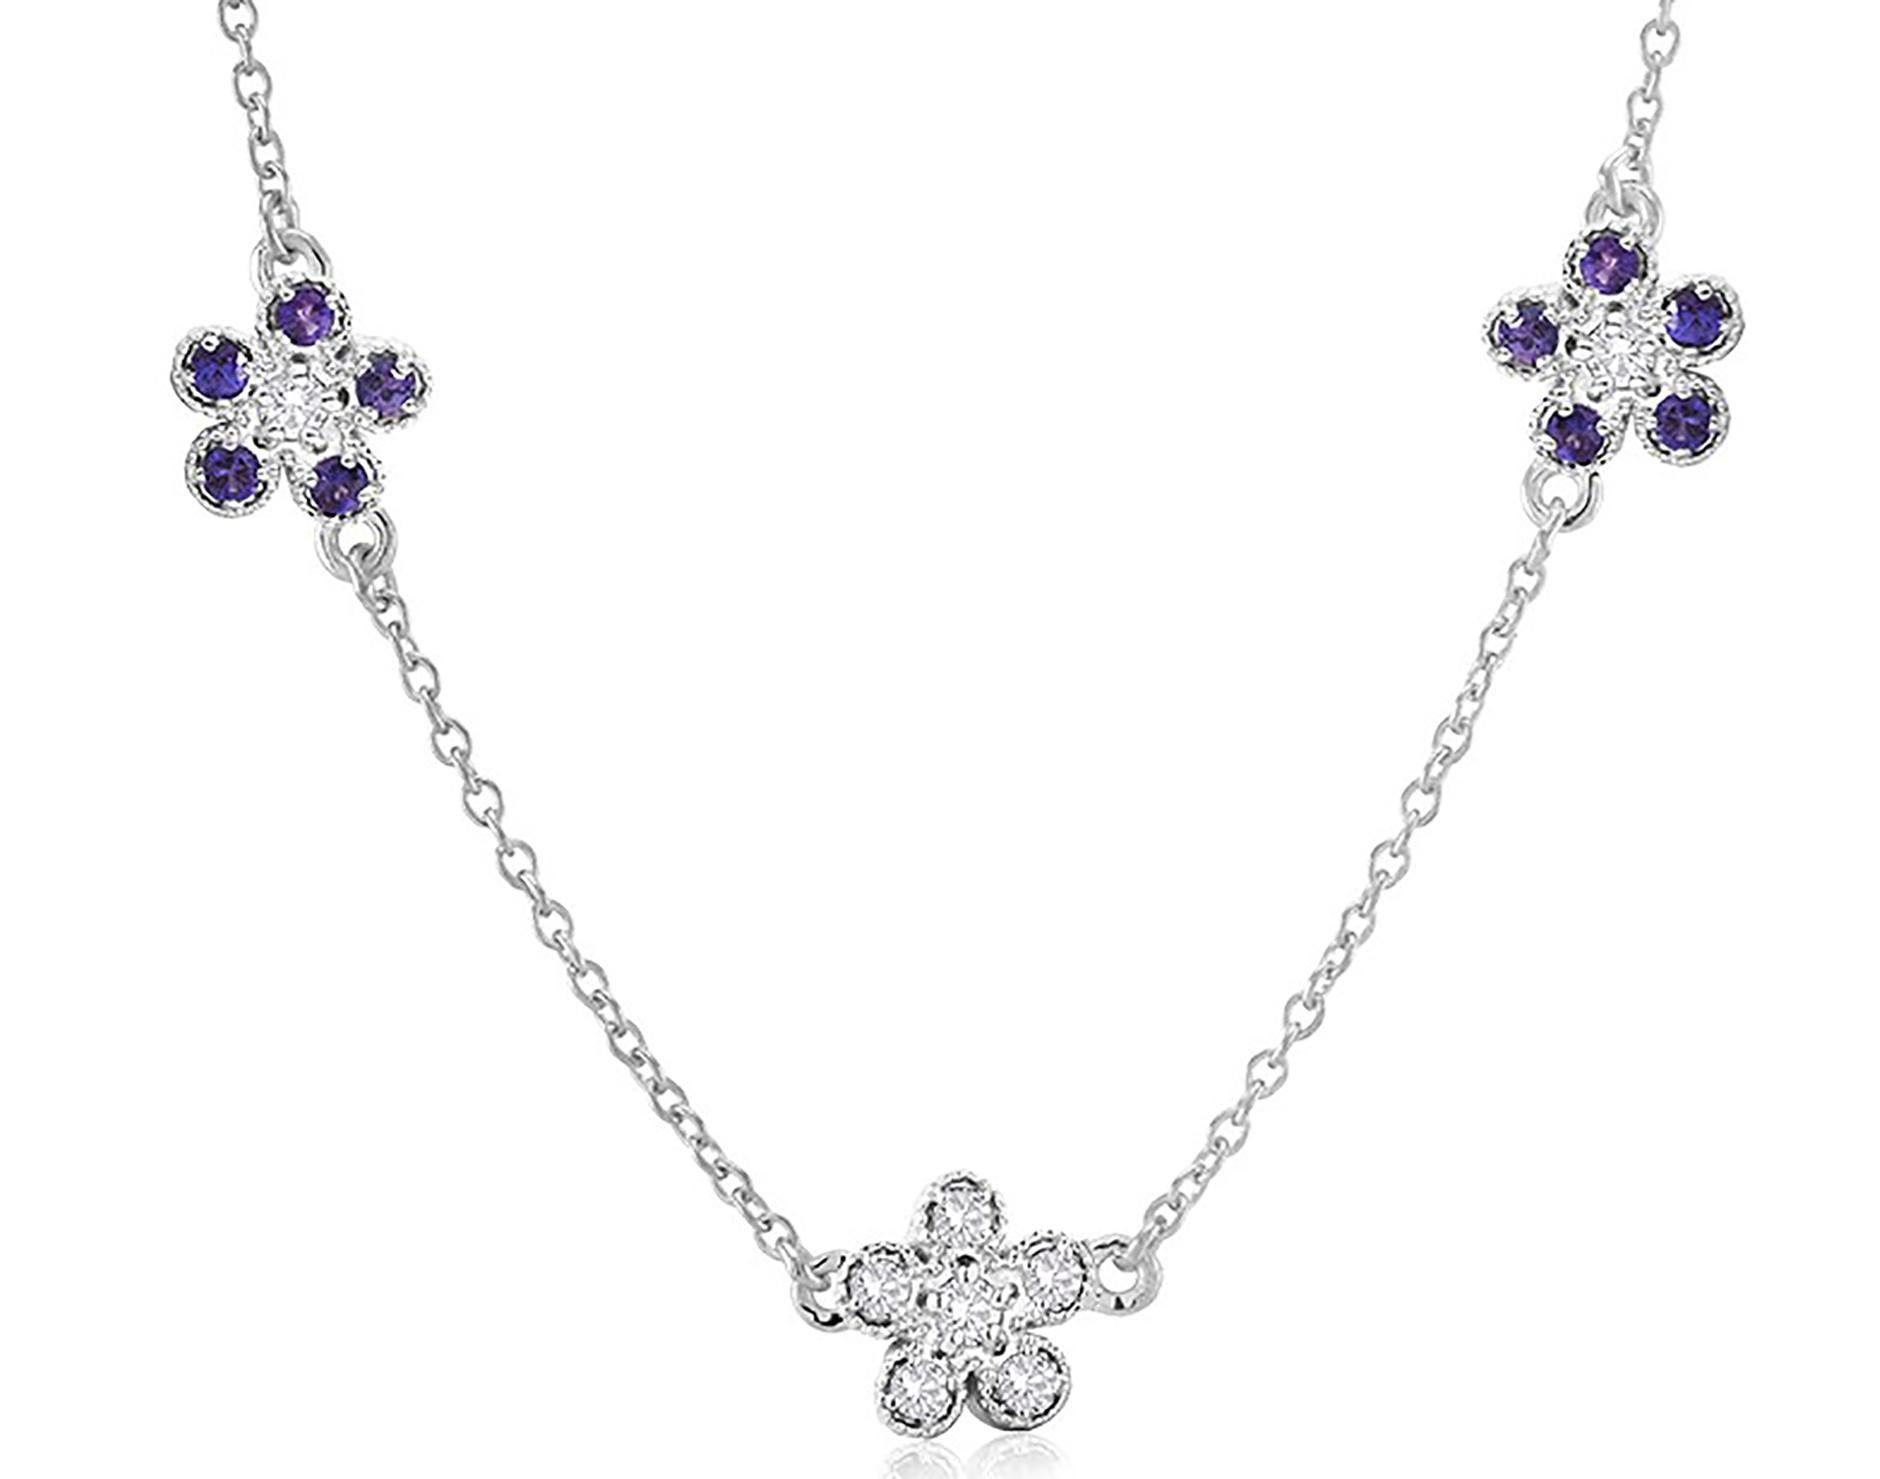 Fourteen karat white gold necklace pendant with three floral diamond and sapphire charms 
Diamond weighing 0.41 carat
Sapphire weighing 0.45 carat
Measuring 18 inches long
Thin cable chain necklace with spring lock: a lock that fastens with spring